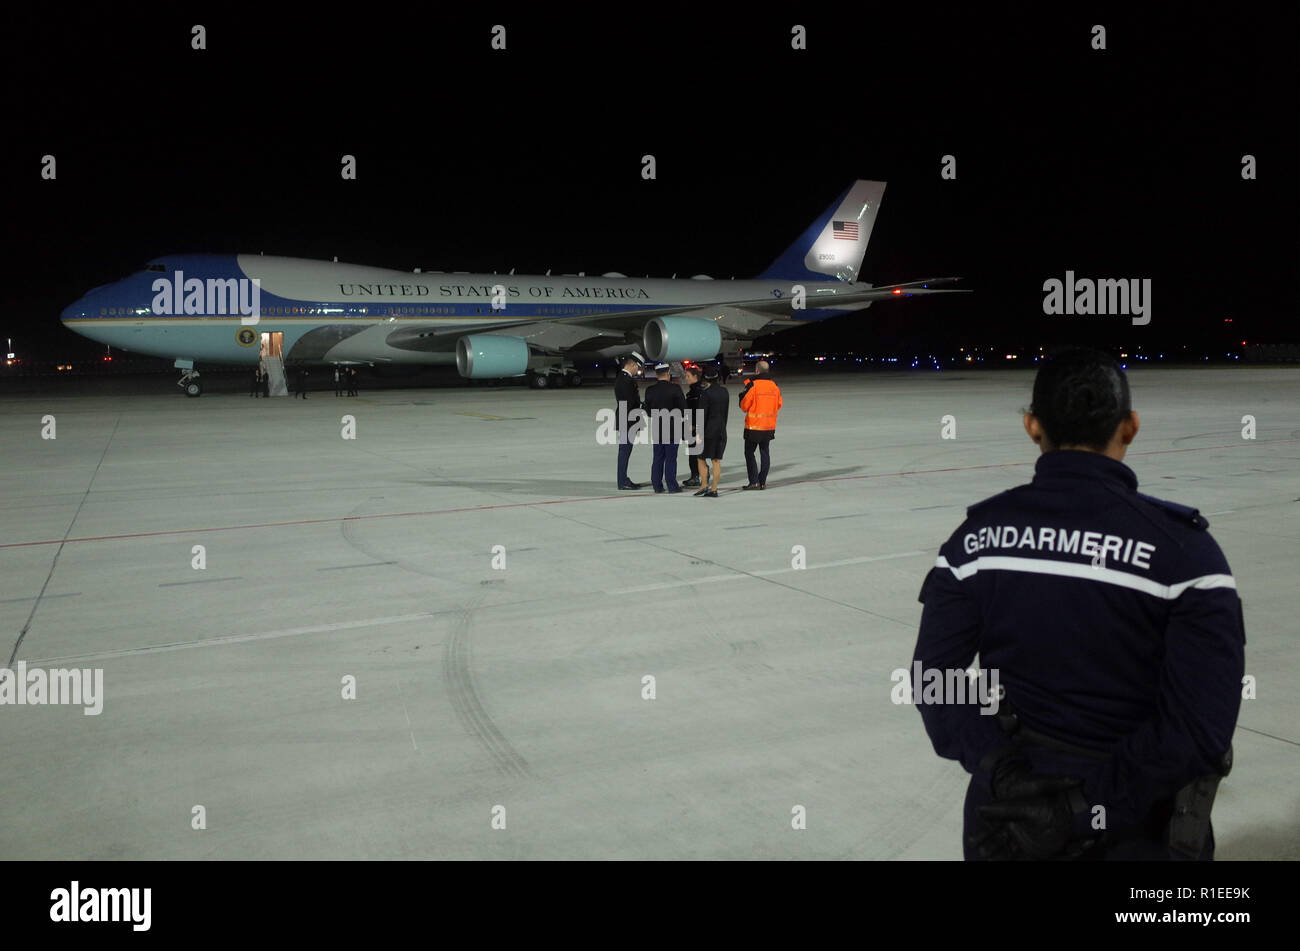 November 09, 2018 - Paris, France: French gendarmes watch on as US Air Force One arrives at the airport of Paris Orly. Le president americain Donald Trump et son epouse Melania descendent de l'Air Force One a leur arrivee a l'aeroport d'Orly. *** FRANCE OUT / NO SALES TO FRENCH MEDIA *** Stock Photo